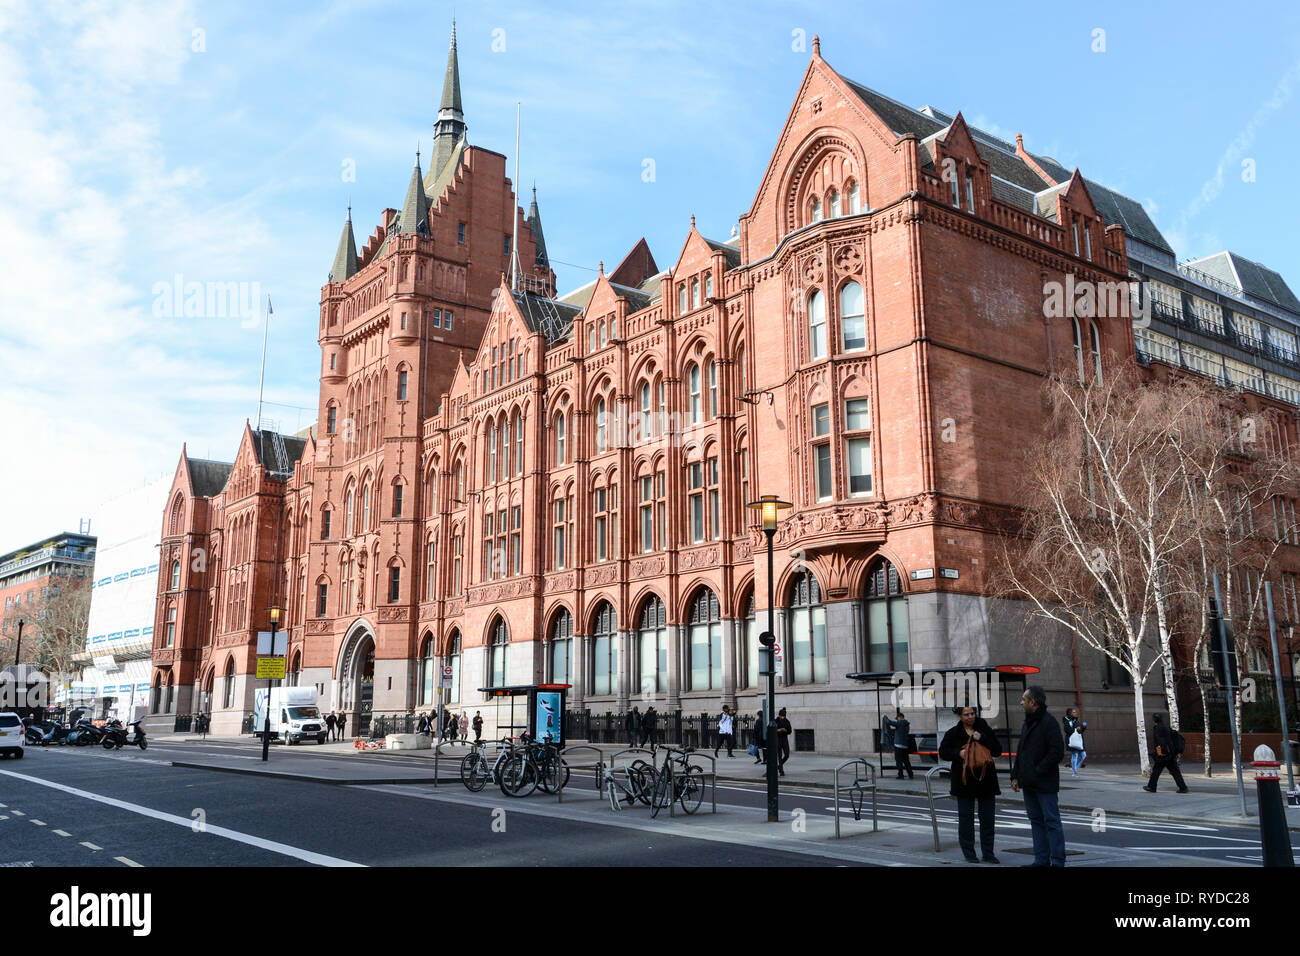 Holborn Bars the former Prudential Assurance Building designed by Alfred Waterhouse on Holborn, London, UK Stock Photo